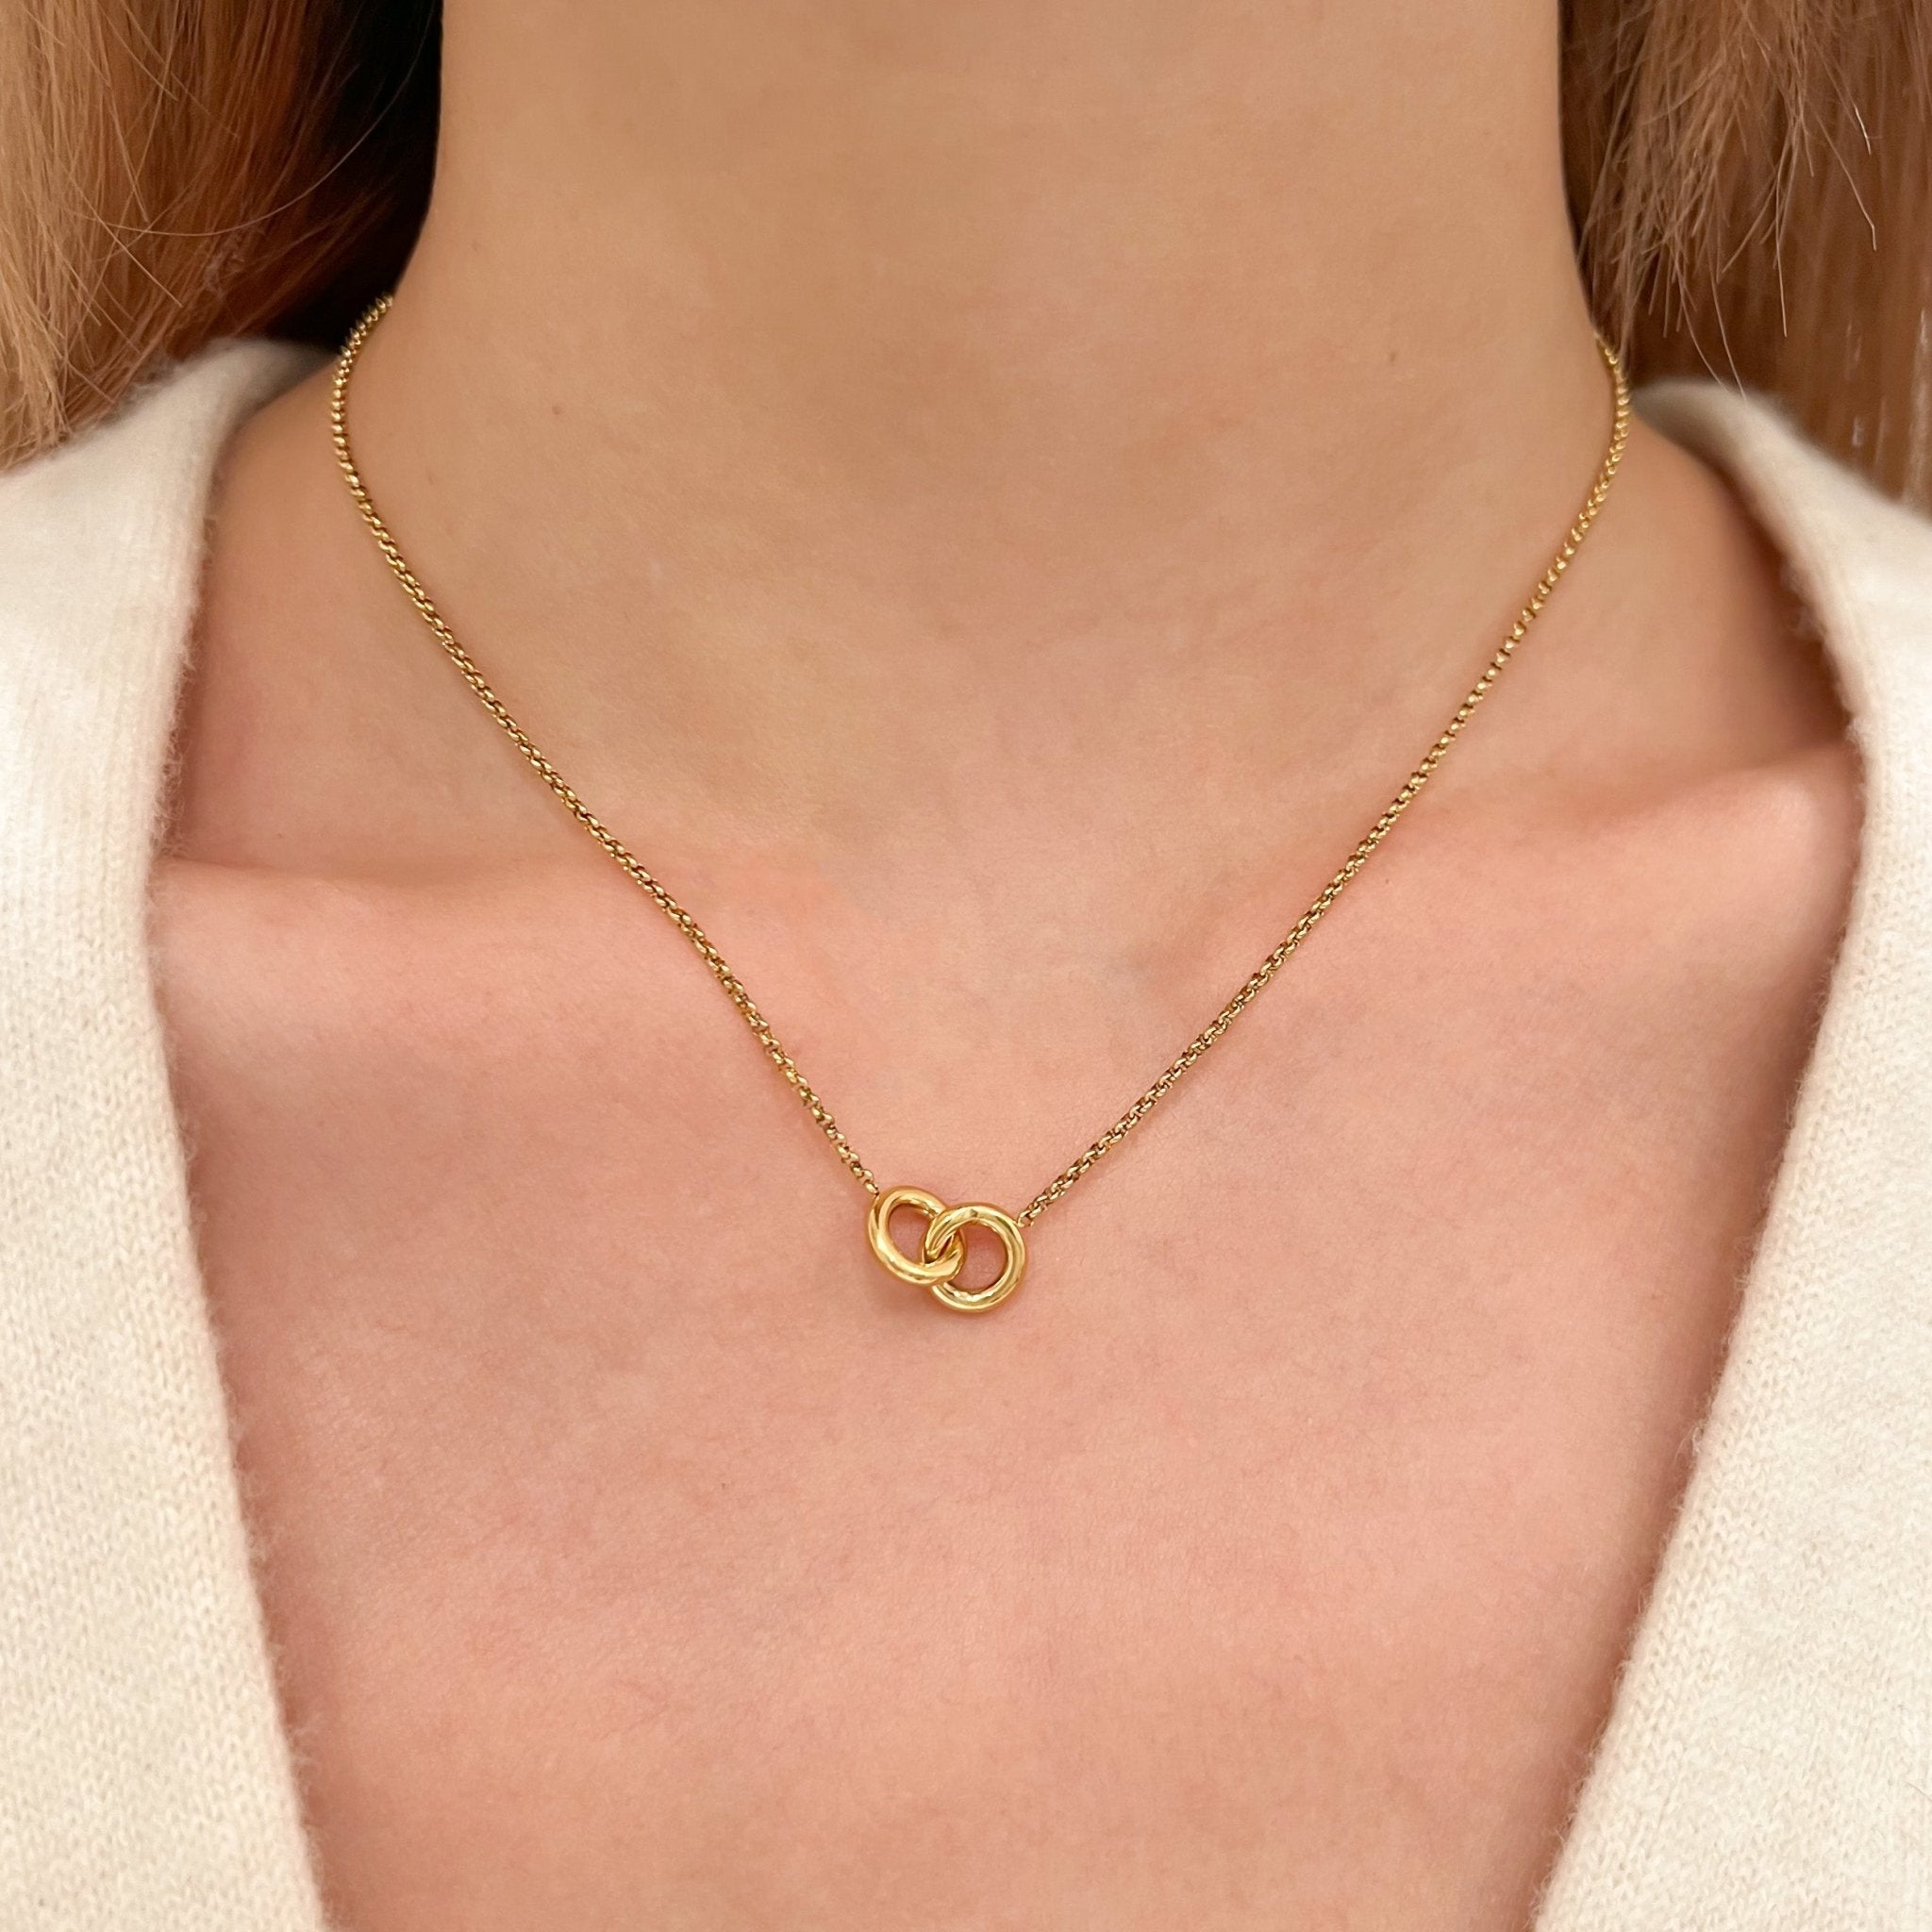 Twin Souls Necklace in Gold - Flaire & Co.